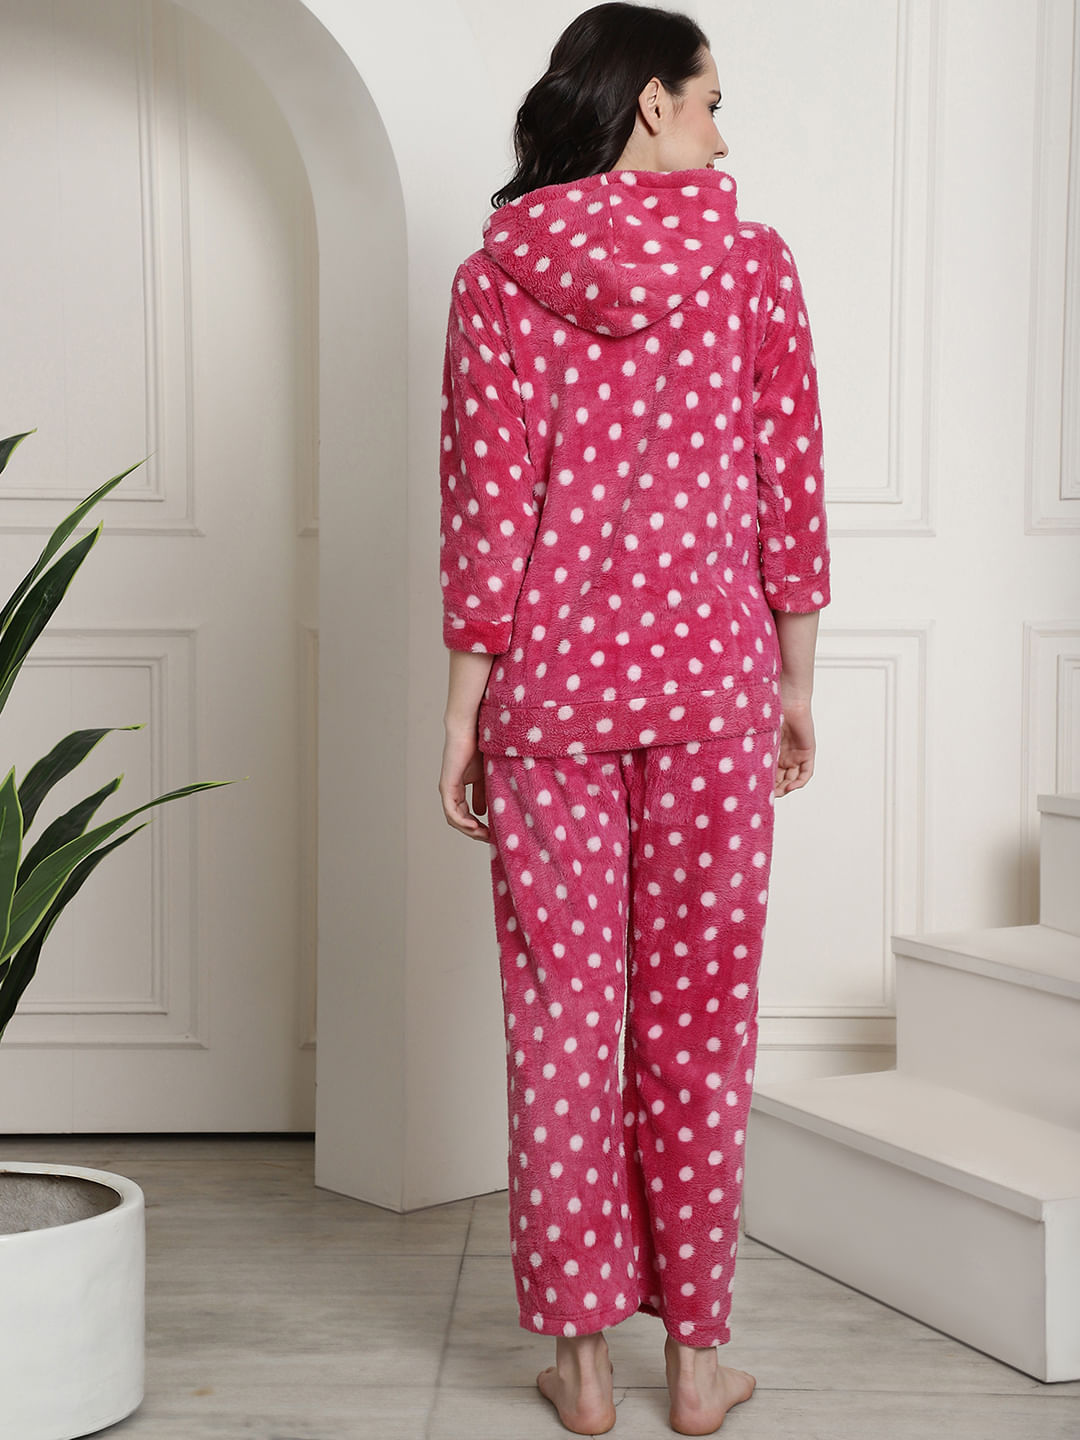 Pink Polka Dots Winter Night Suit